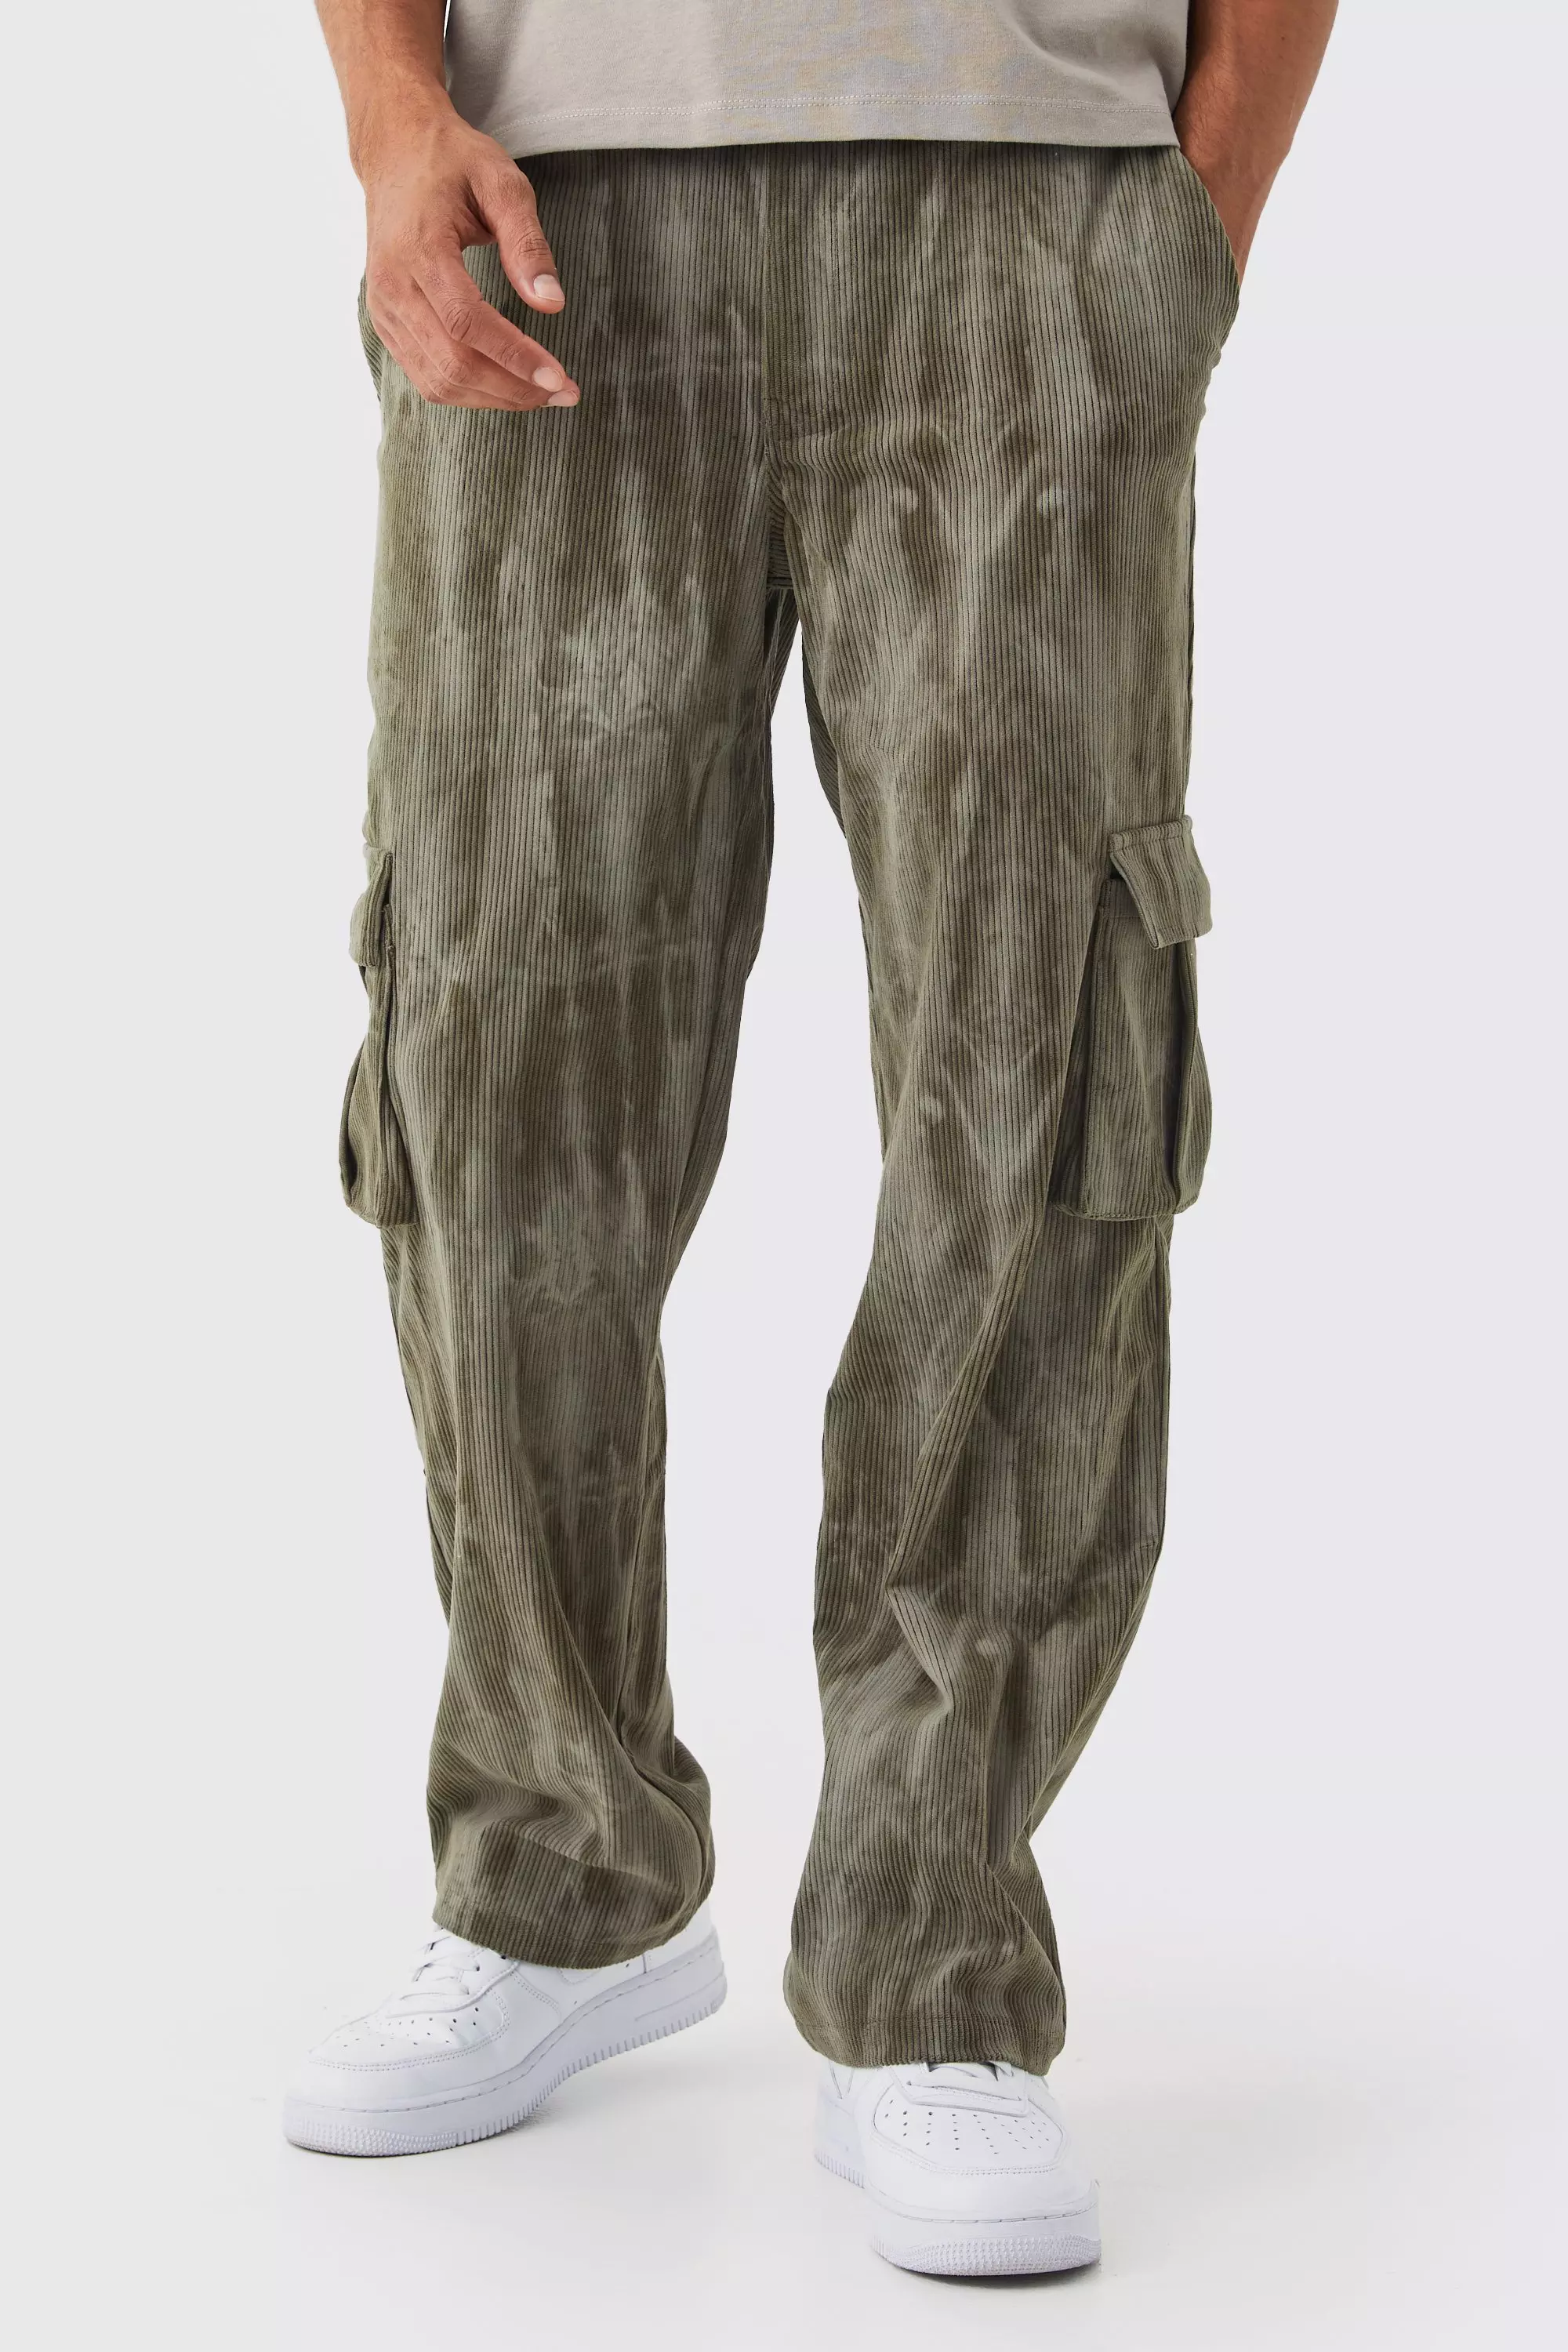 Sage Green Fixed Waist Relaxed Tie Dye Cargo Cord Pants